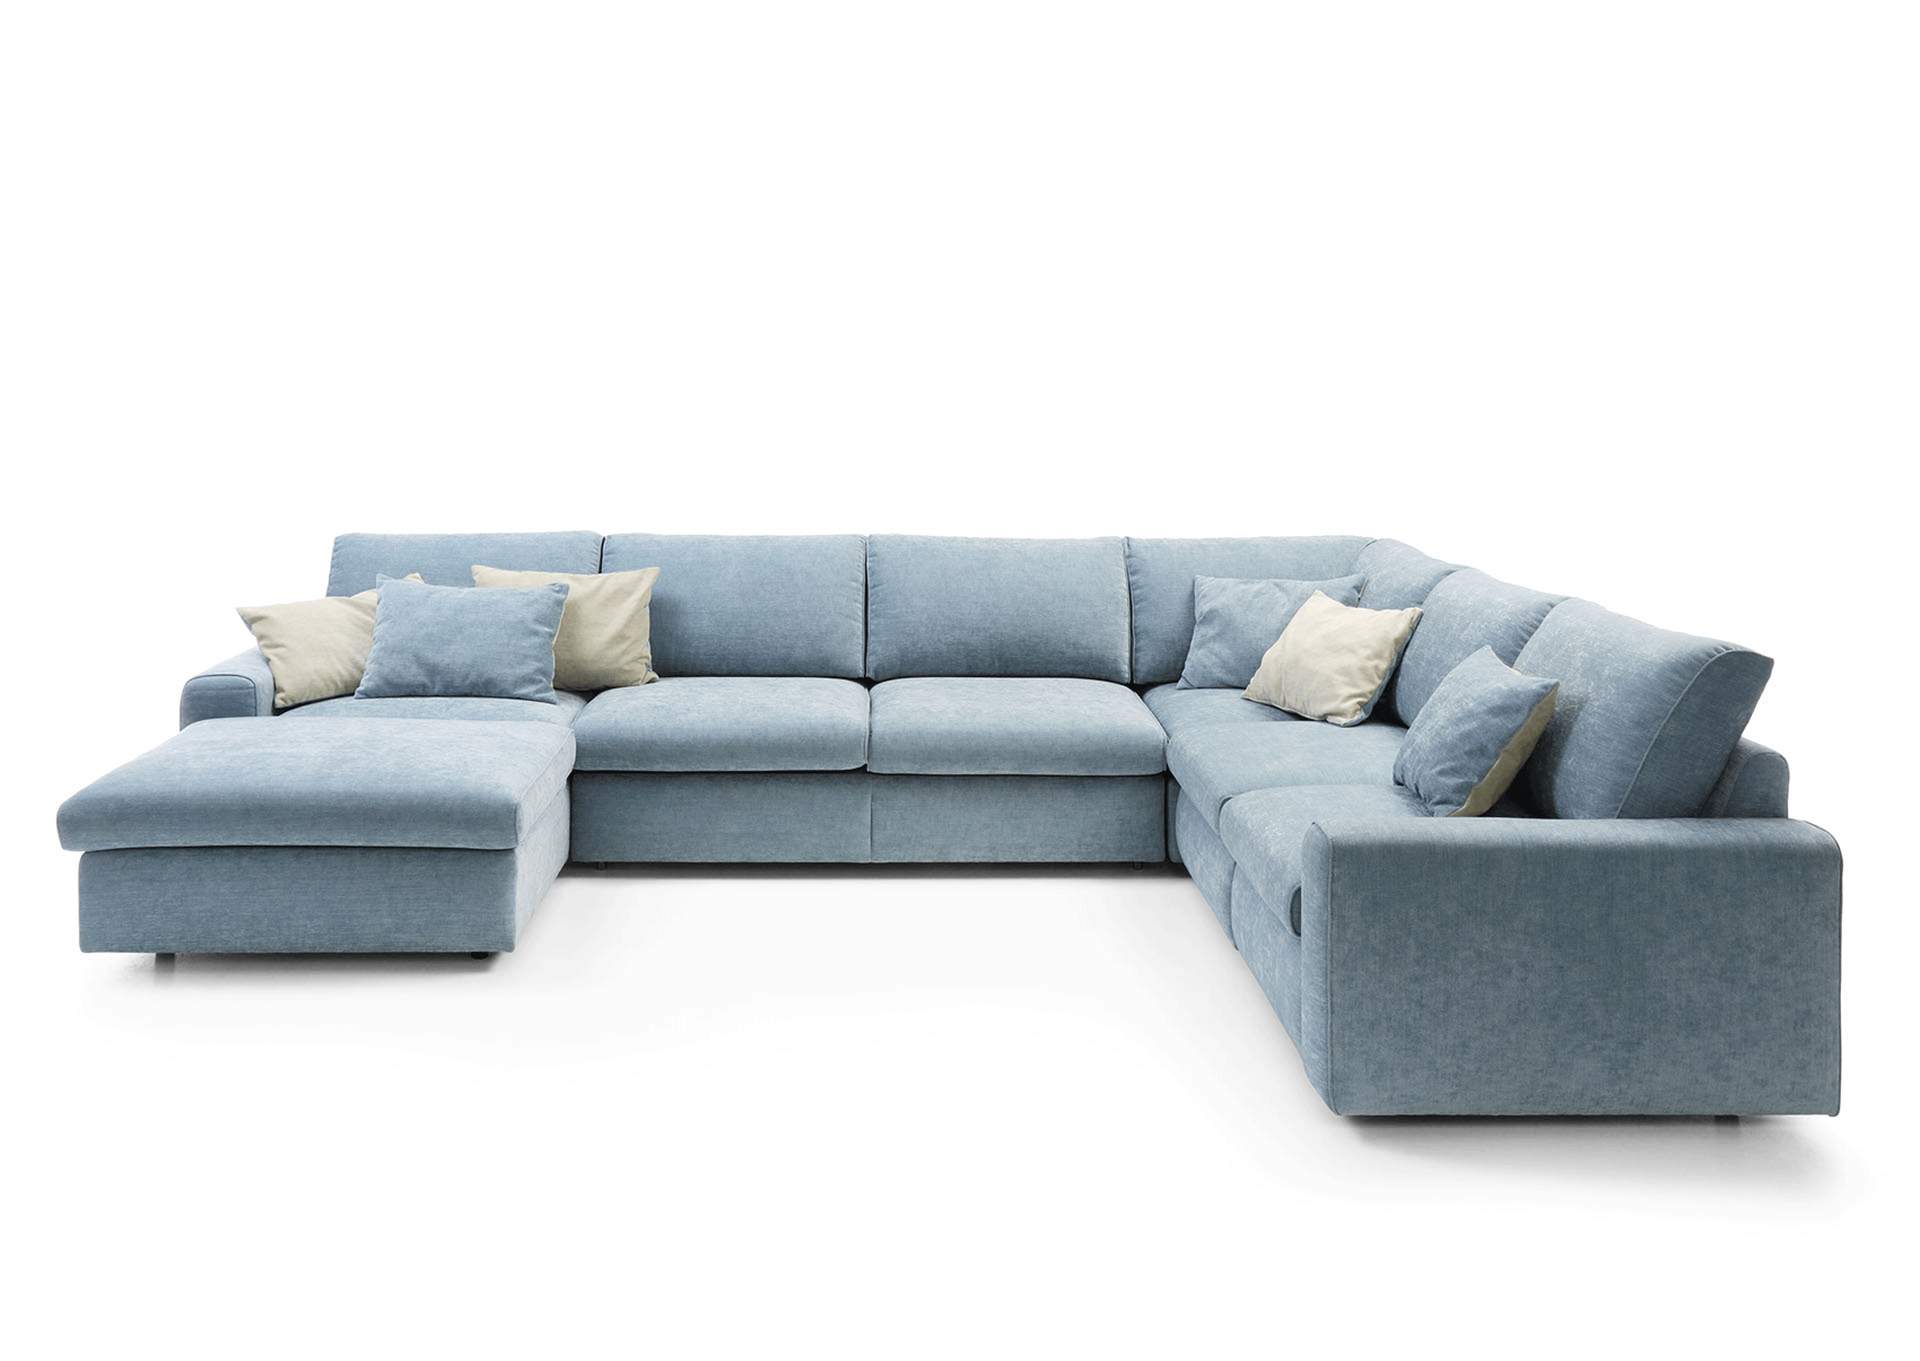 Blue Karato Sectional Left W/ Sleeping Function And Storage,ESF Wholesale Furniture